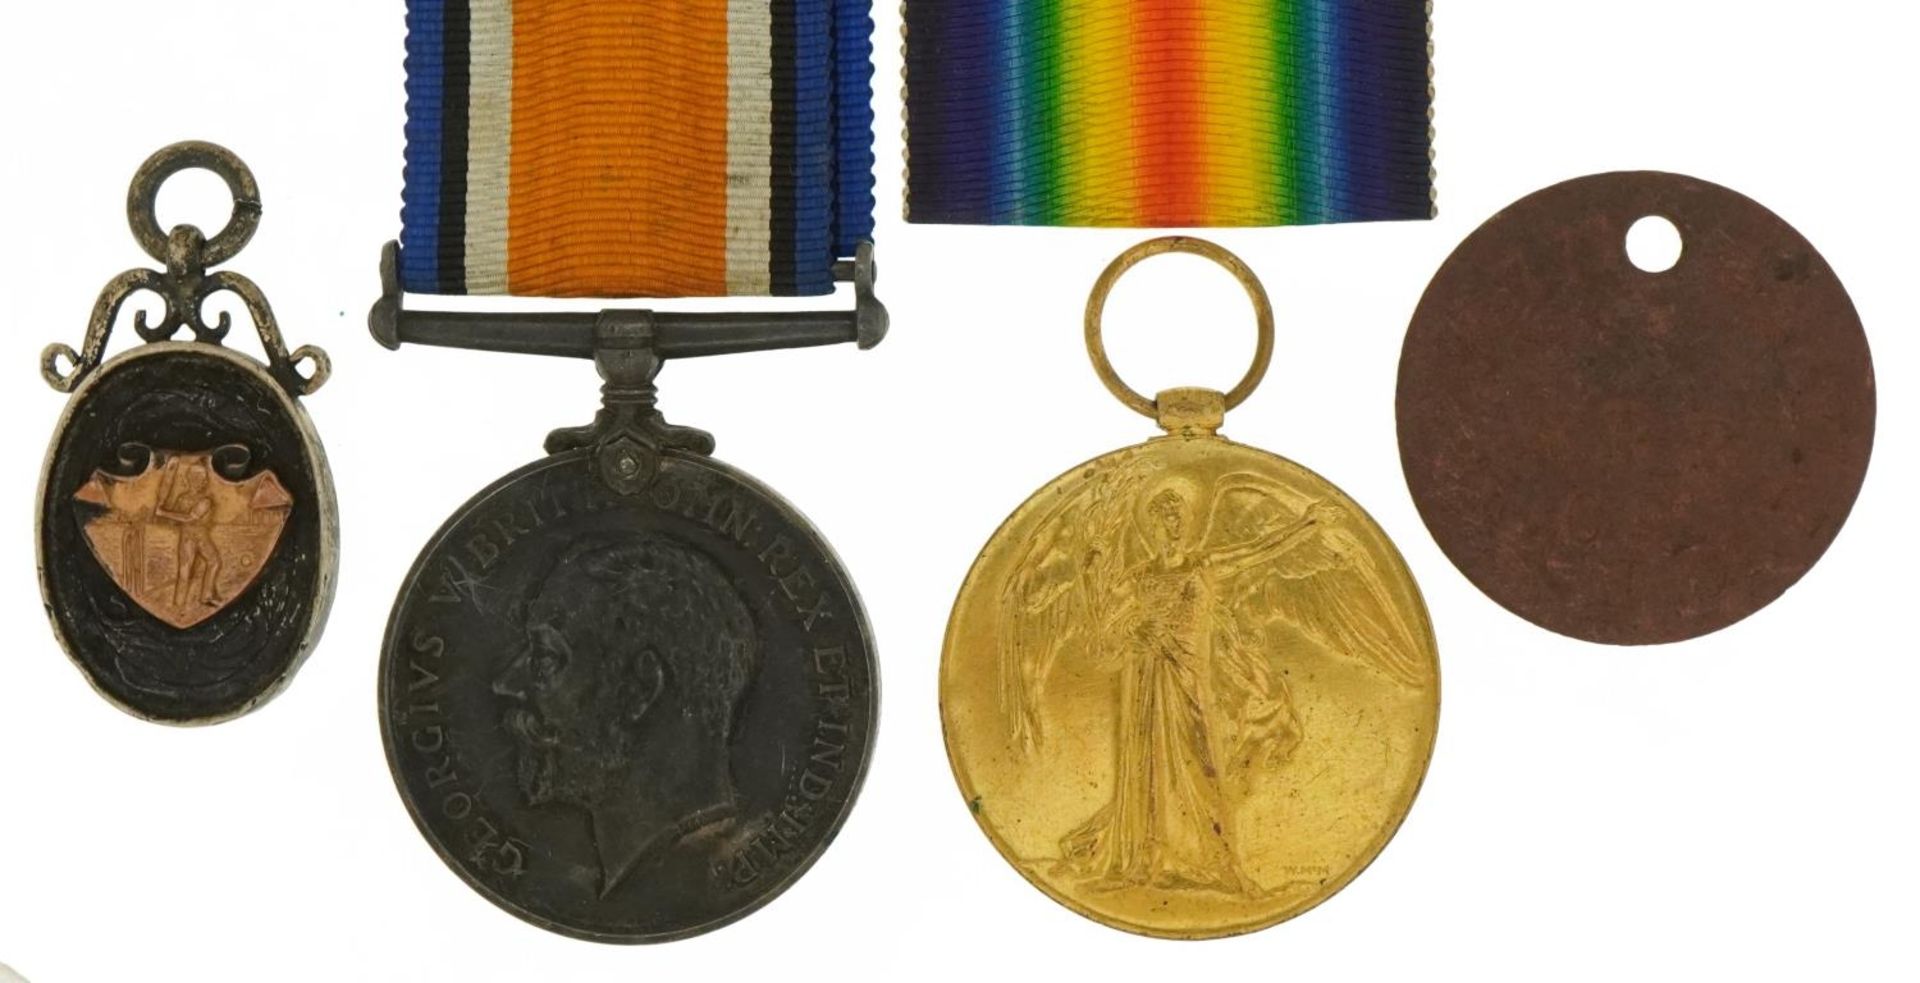 British military World War I pair with related dog tag and silver sports jewel, the pair awarded